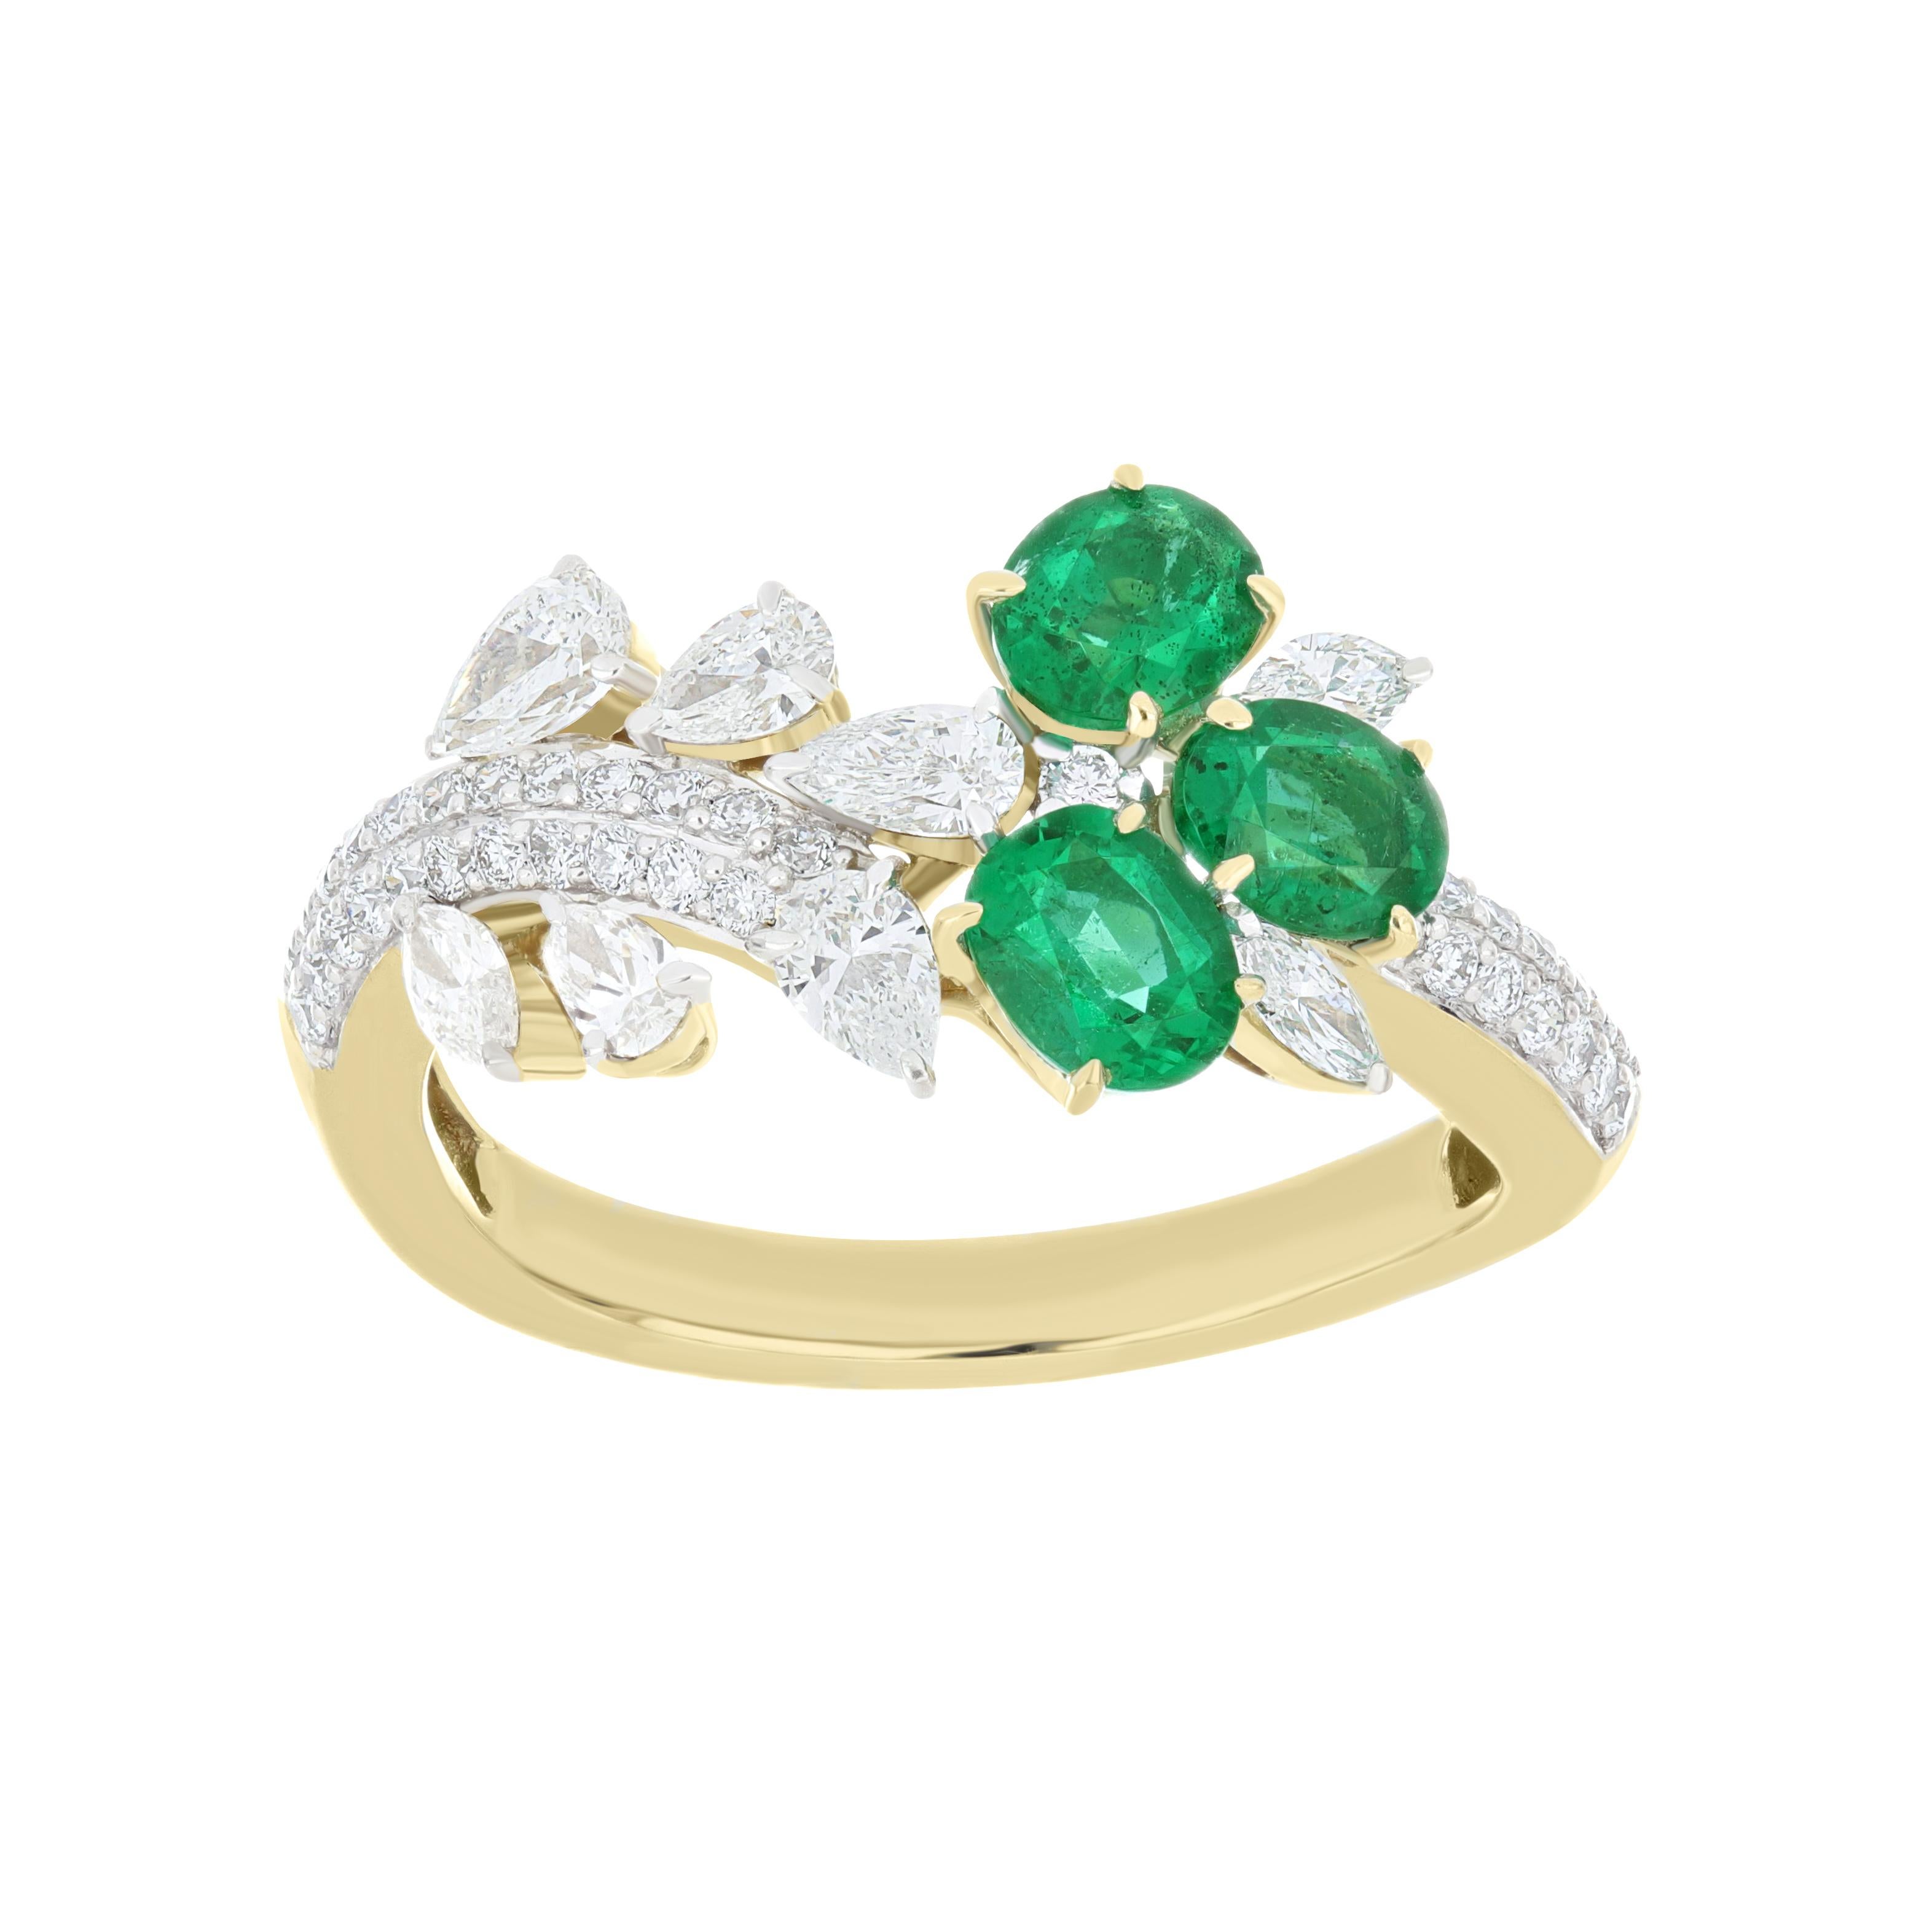 For Sale:  Emerald And Diamond Ring 18K White Gold handcraft Jewelry For Anniversary Gift 2